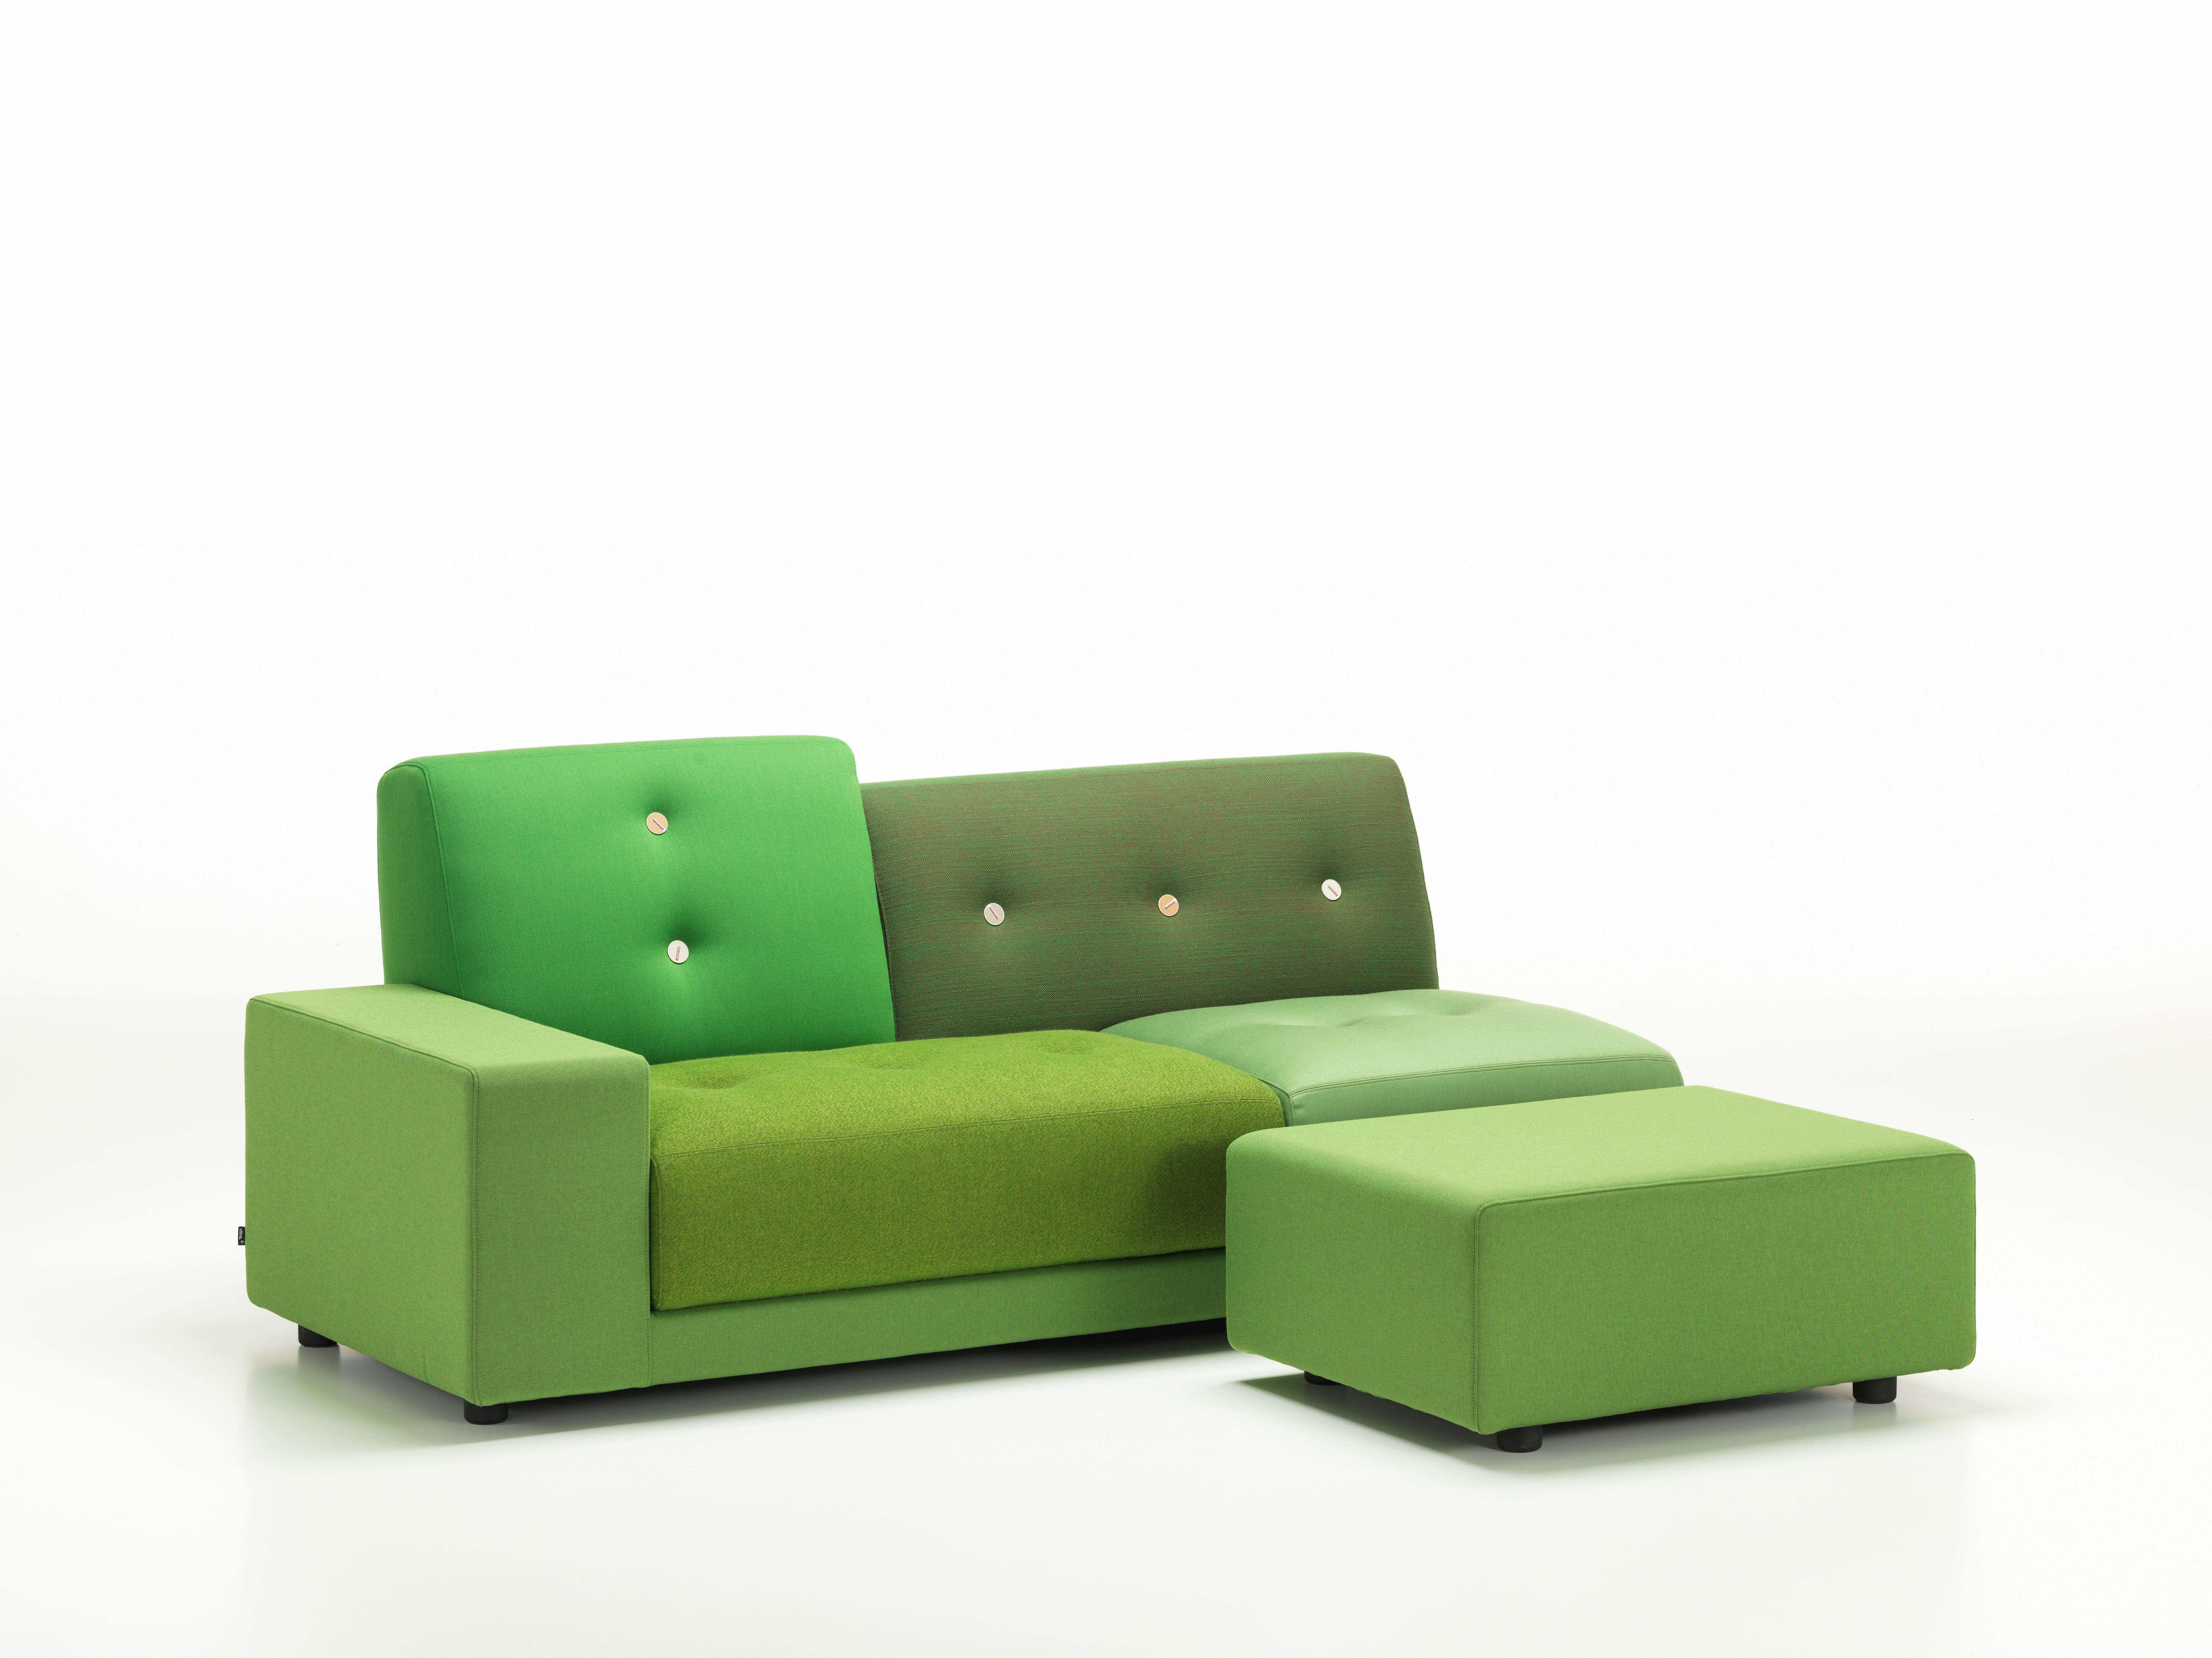 Swiss Vitra Polder Sofa in Green Shades by Hella Jongerius For Sale